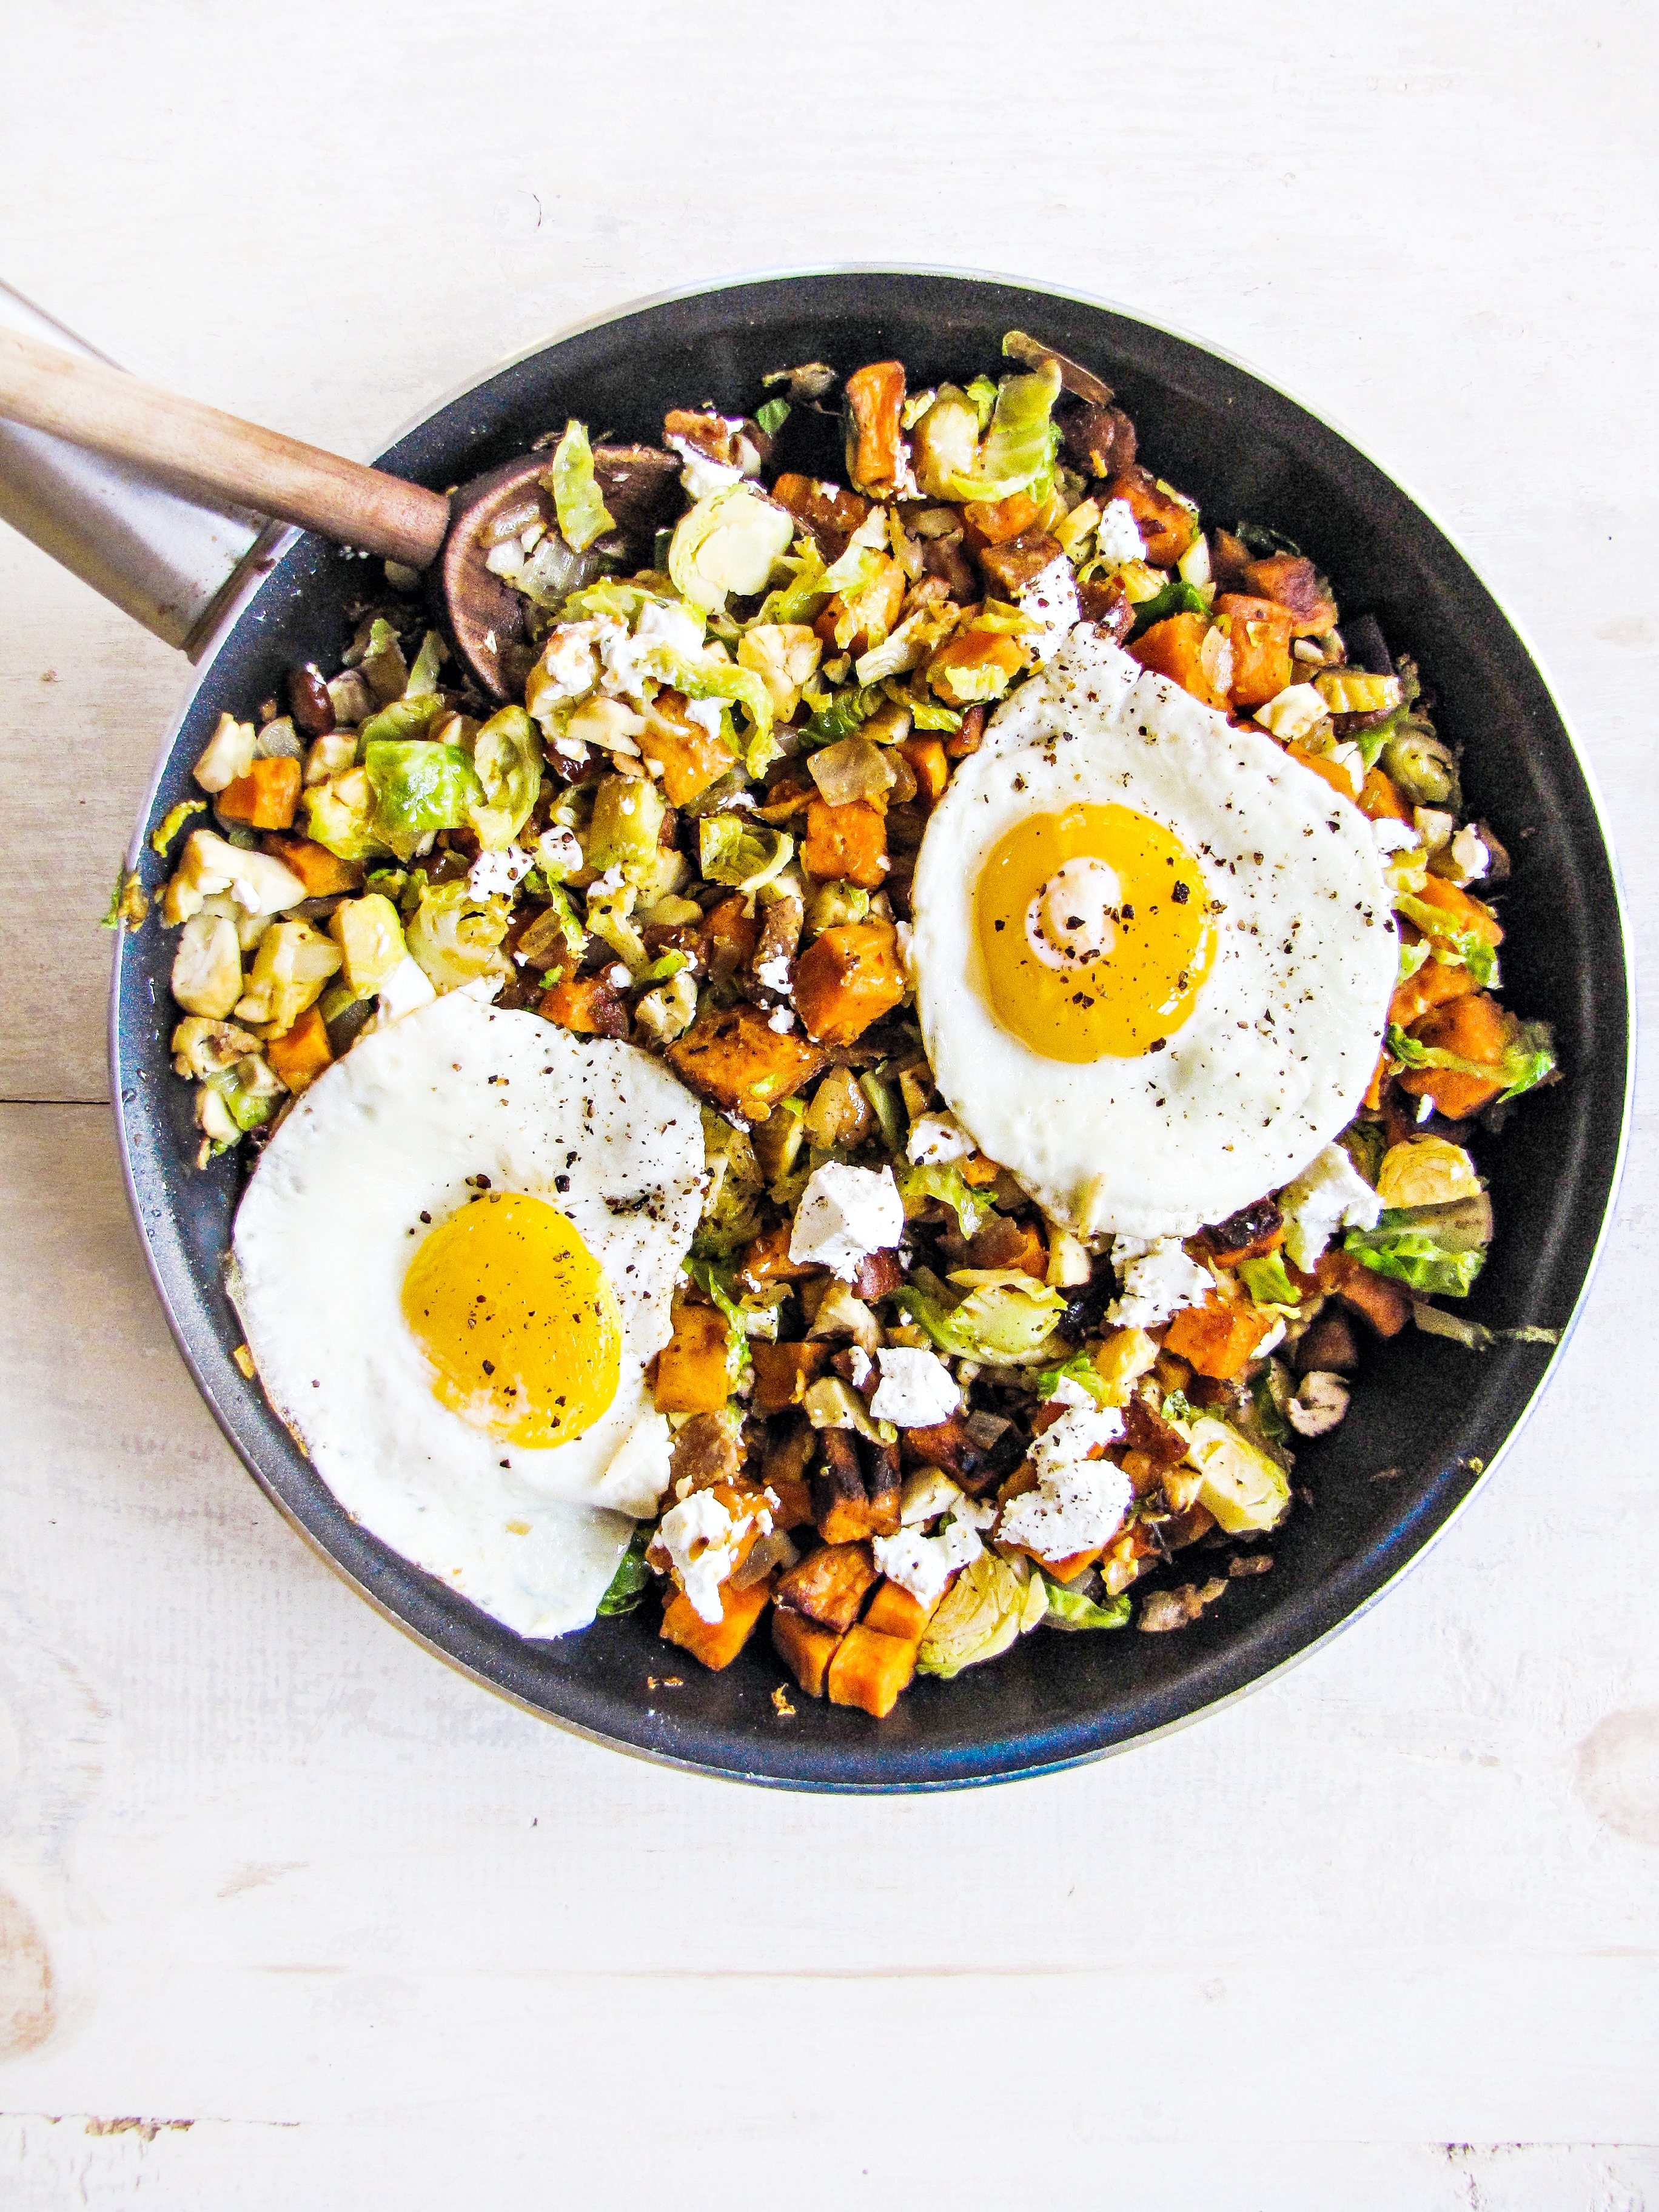 Winter Cleanse 2014: Healthy Breakfast Recipes - Brussels Sprout and Sweet Potato Hash {Katie at the Kitchen Door}